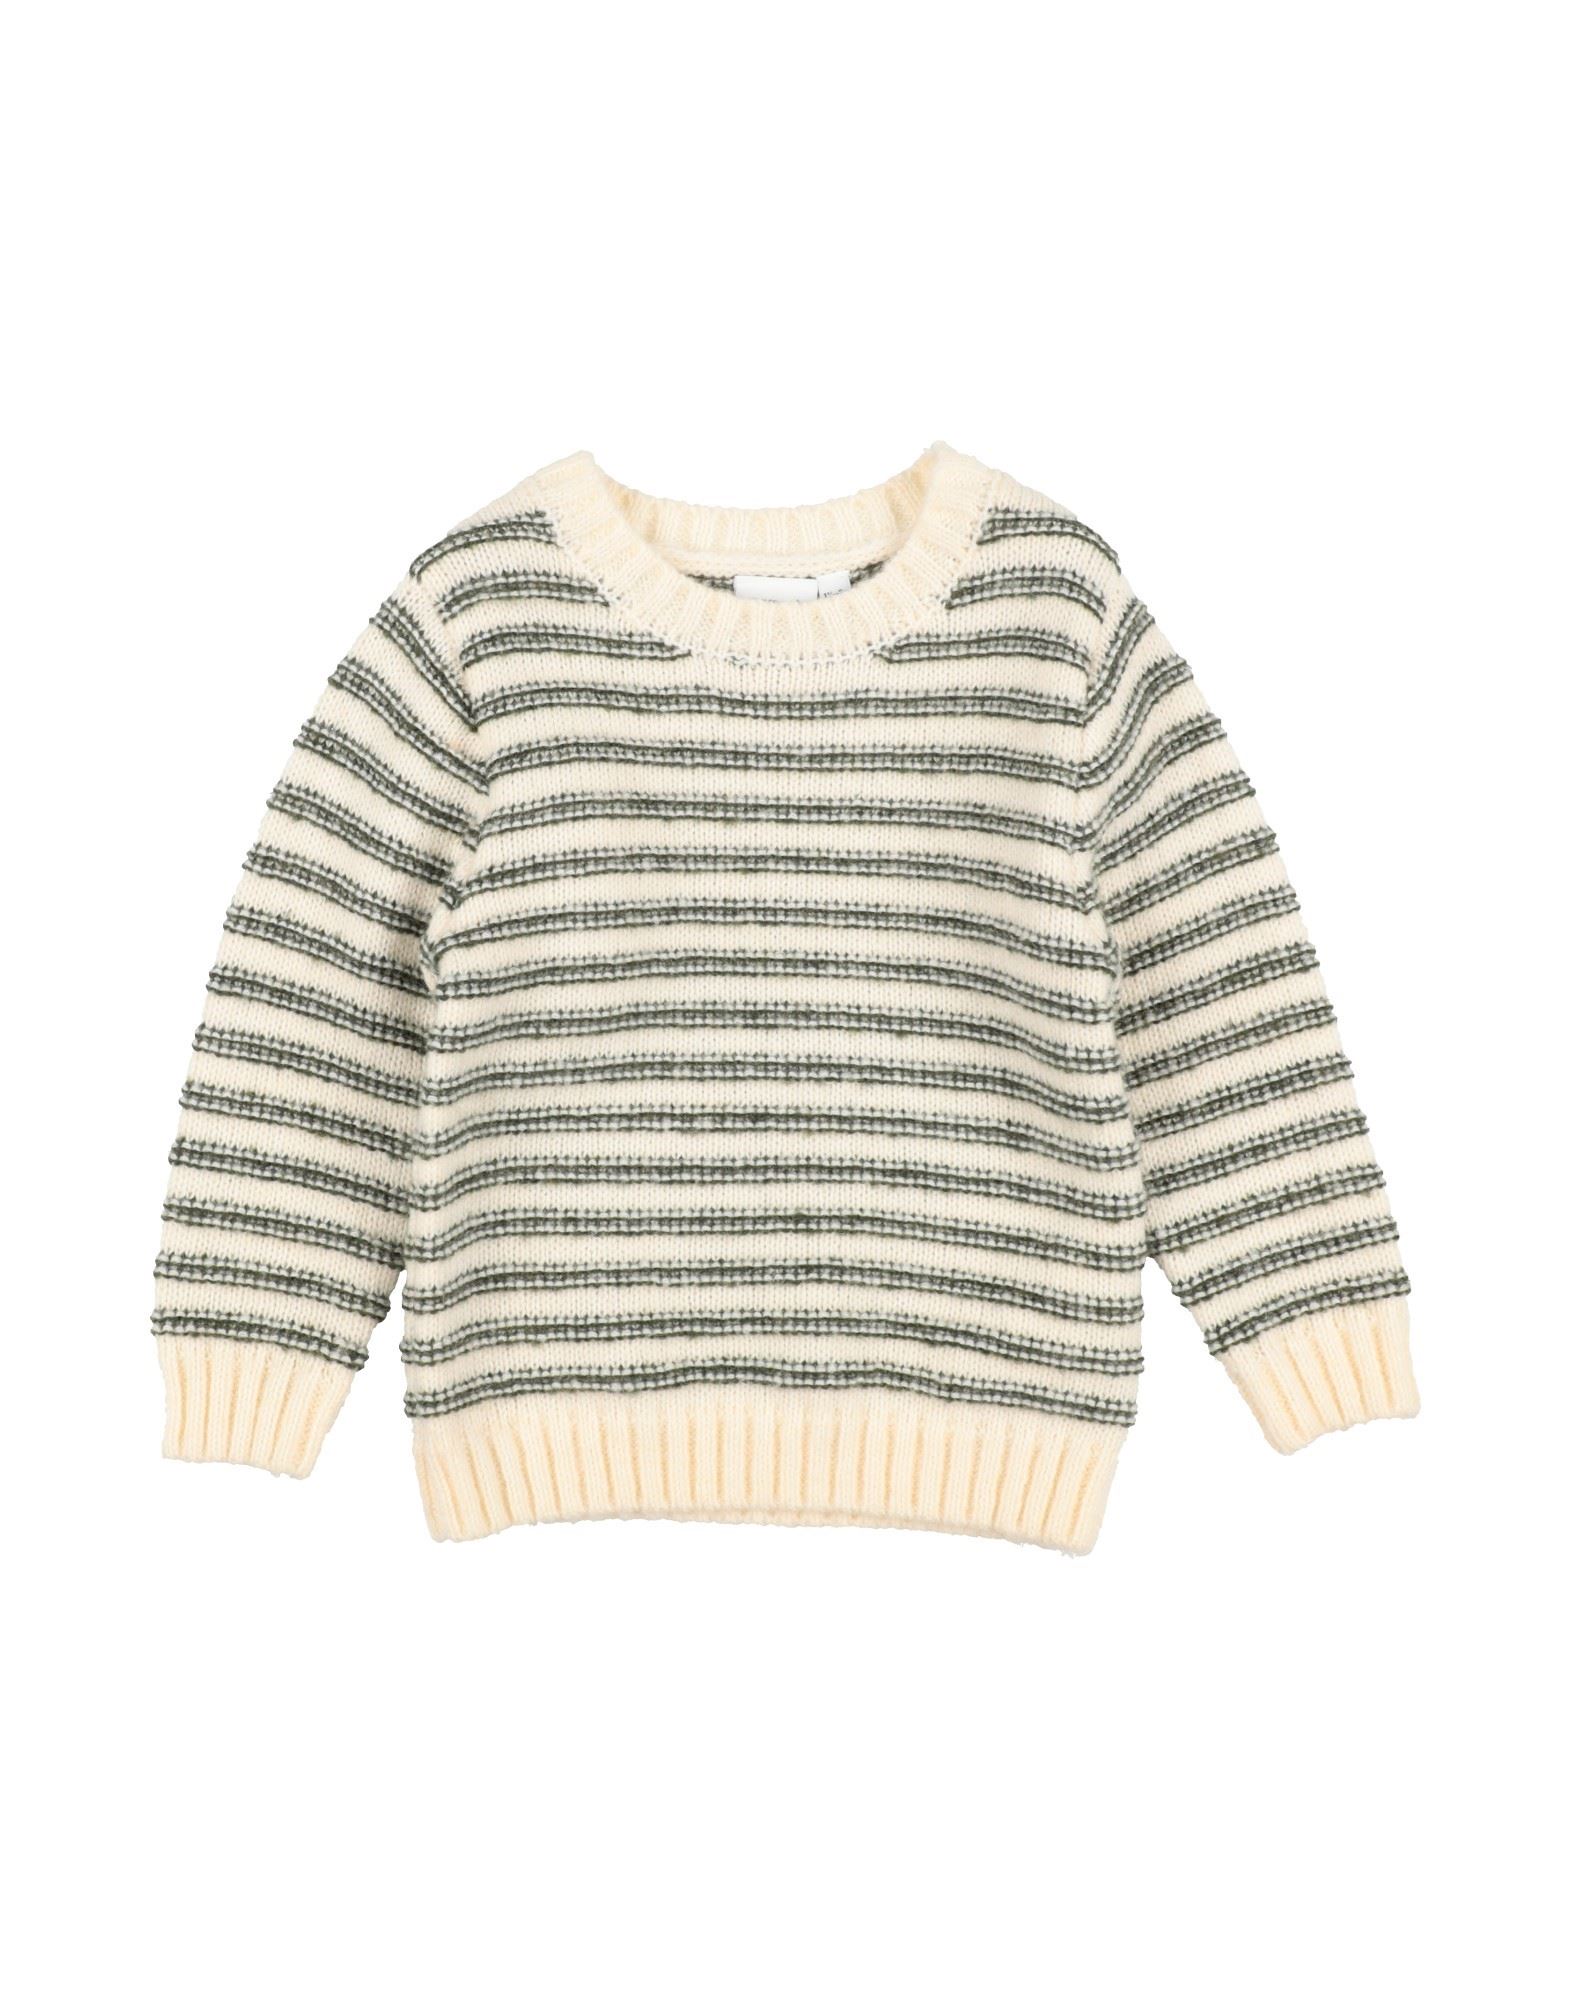 NAME IT® Pullover Kinder Off white von NAME IT®